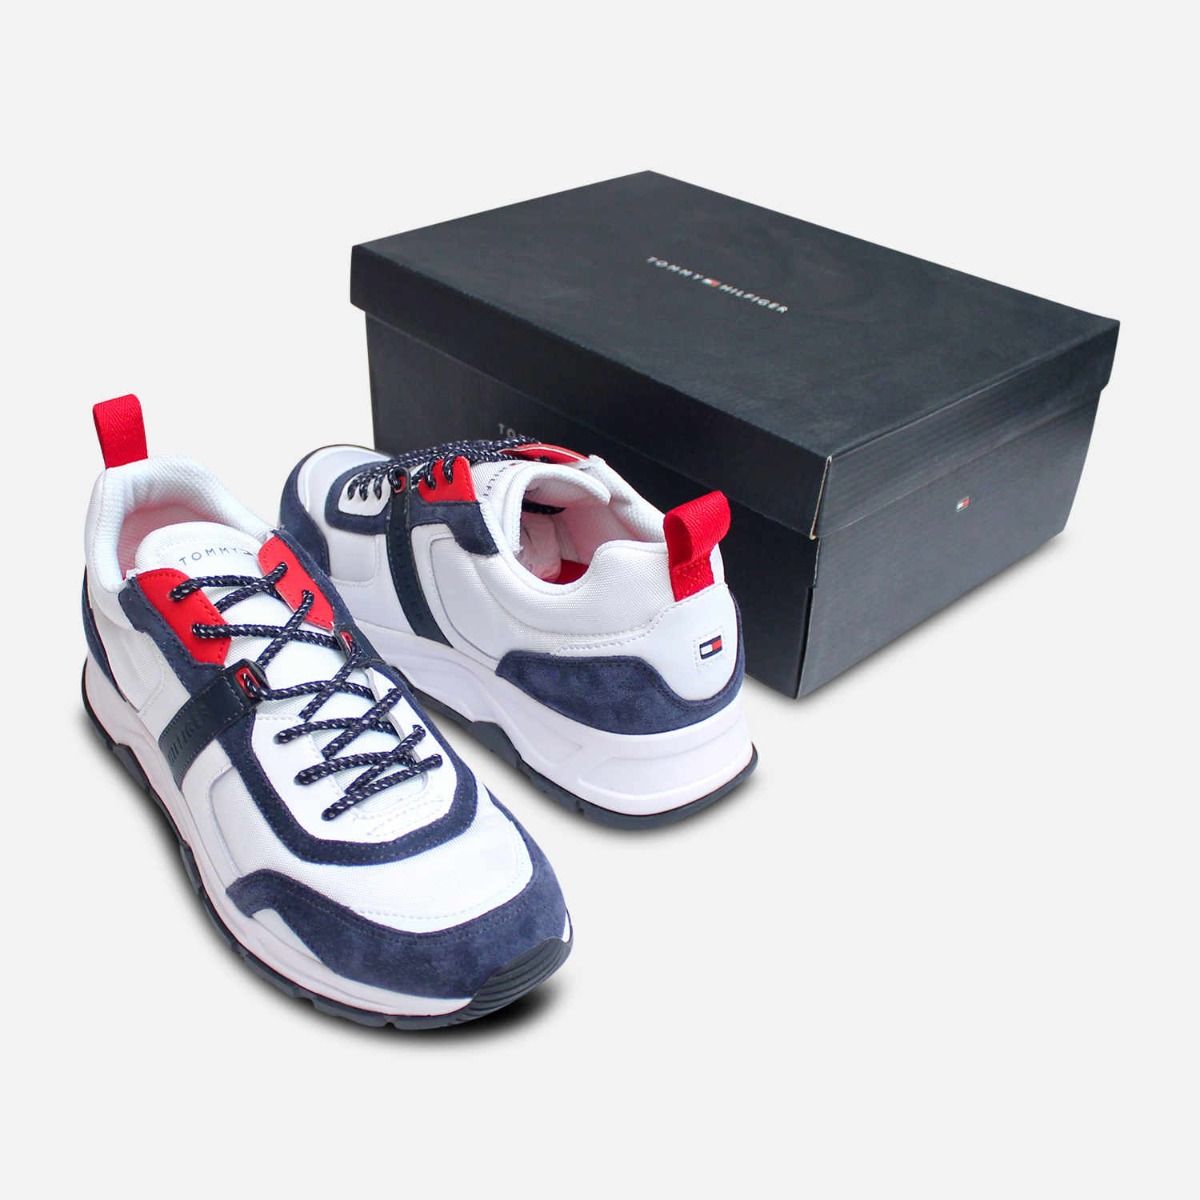 red tommy hilfiger trainers